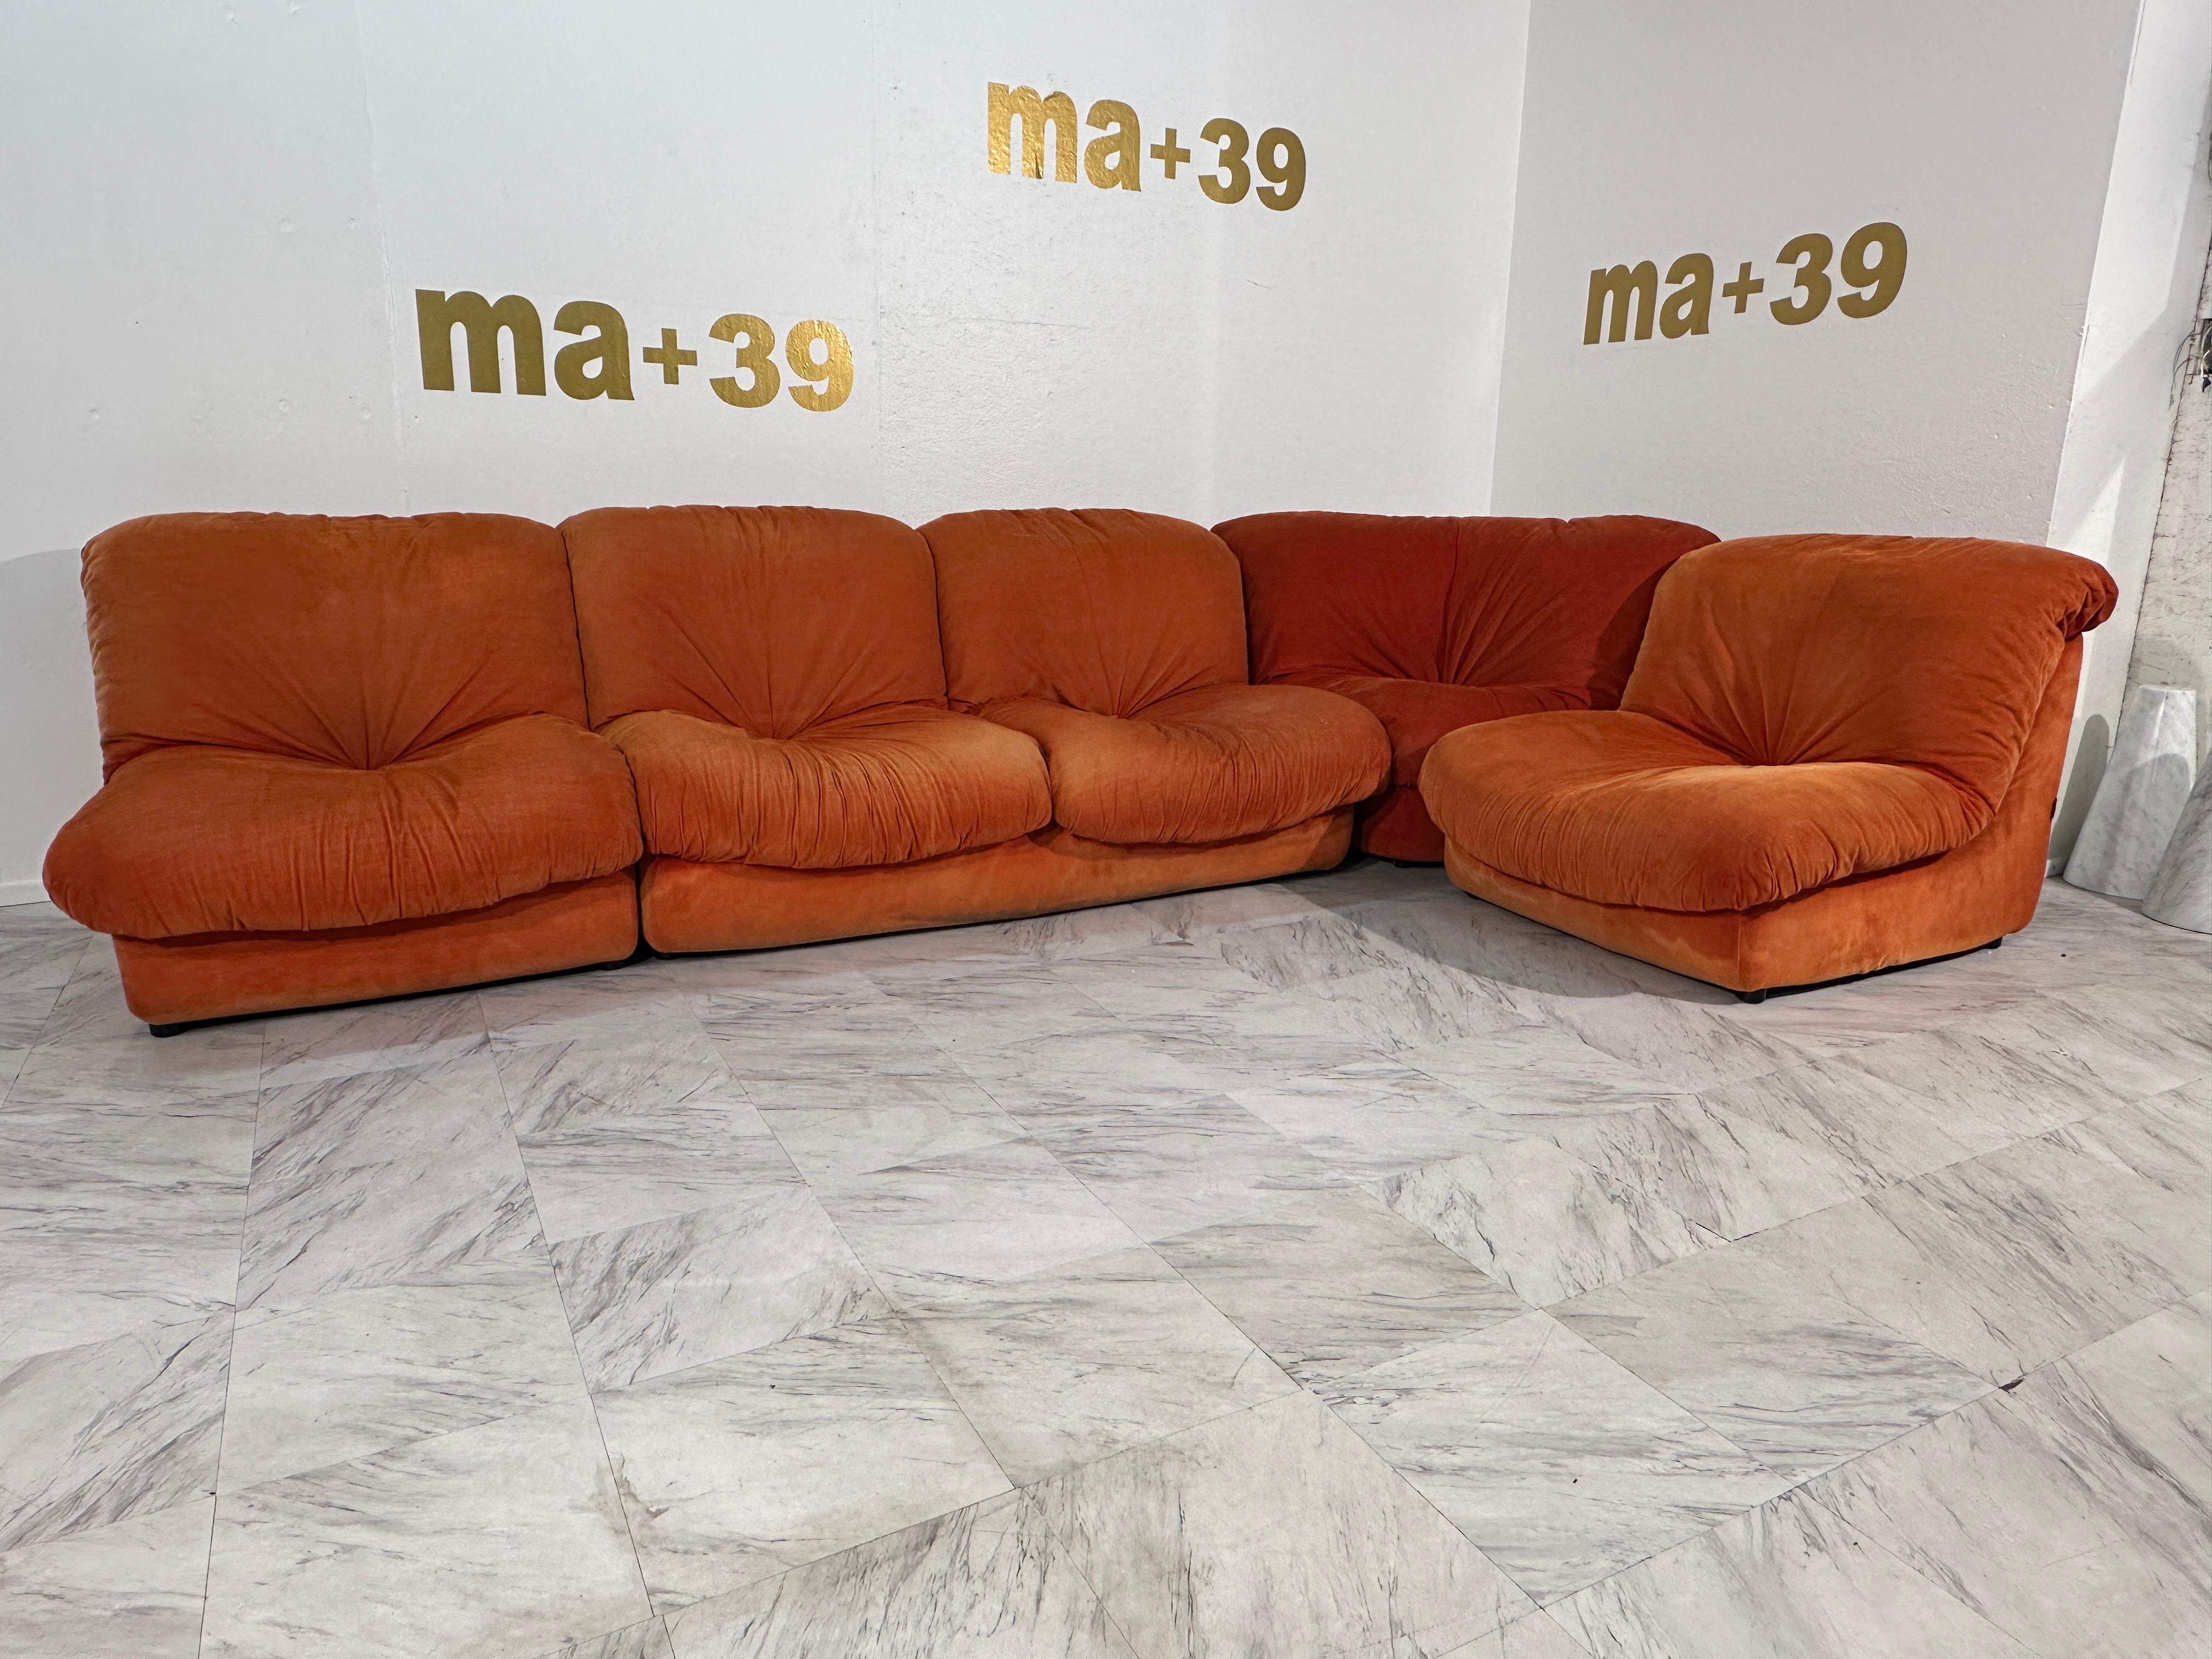 Vintage Italian Modular Sofa From Airborne, 1960s Italy 5 pieces For Sale 2